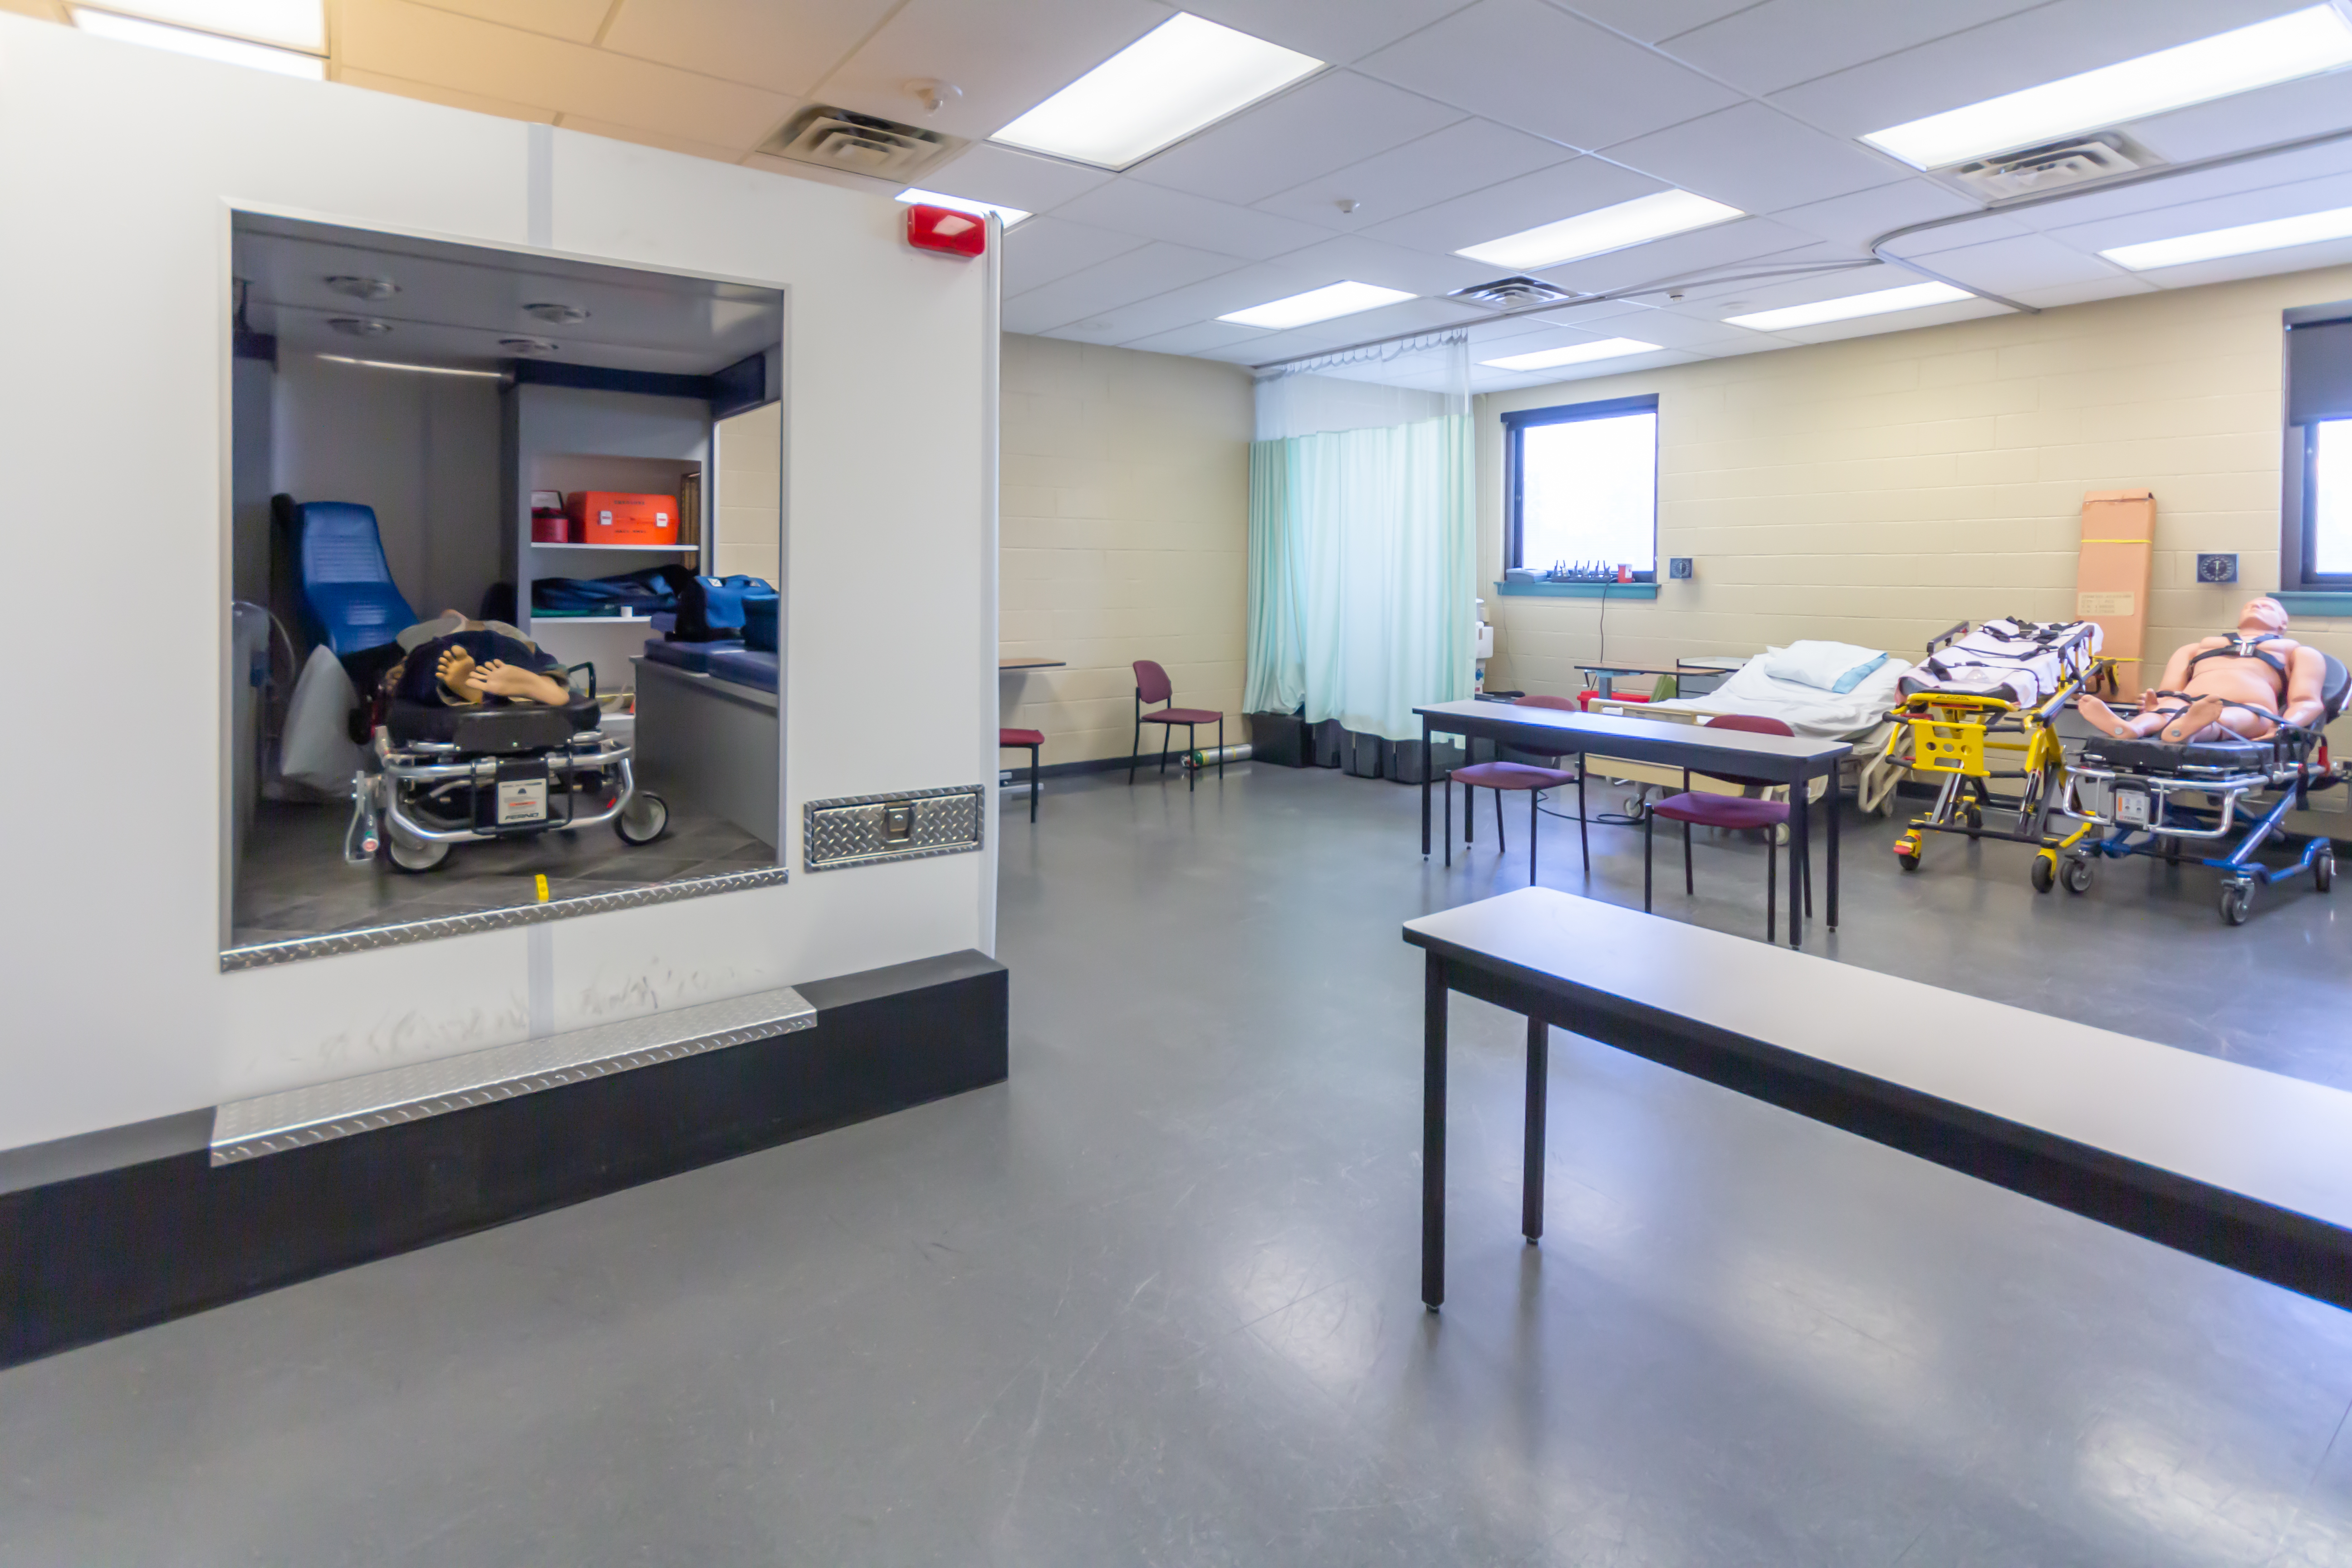 Emergency Medical Services Classroom (208)